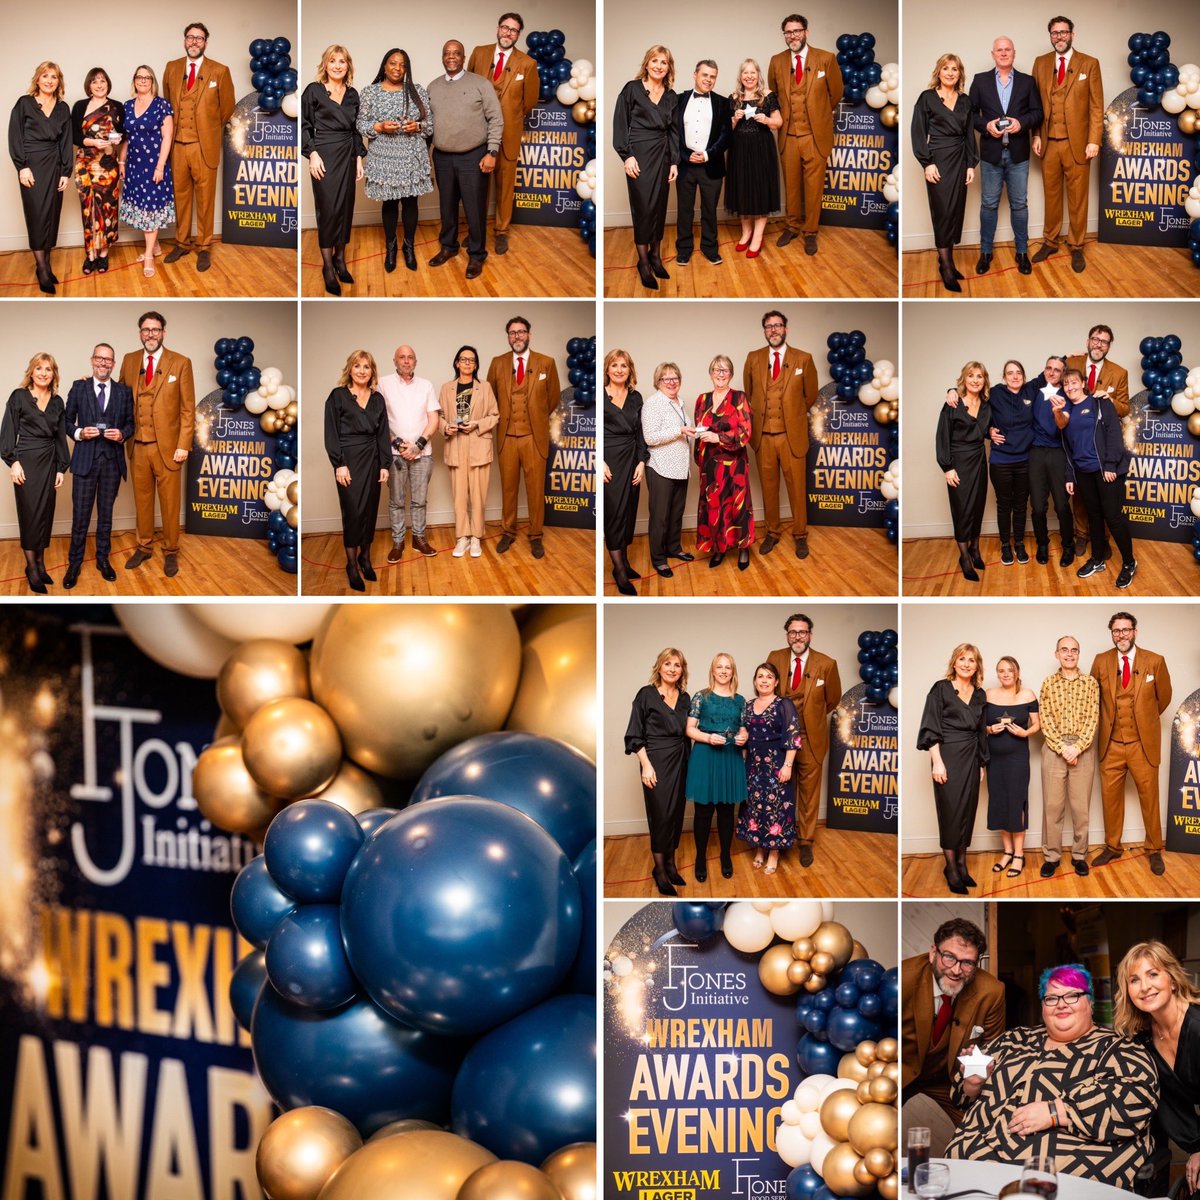 Fabulous Wrexham businesses & organisations recognised at @WXM_Lager’s @fjonesinit 2023/24 Wrexham Recognition Awards evening, hosted by @sianlloydnews & @thehumphreyker 👏👏 #wrexhamrecognitionawards #wrexham #fjonesinitiative #wrexhamlager #supportlocal @wrexham